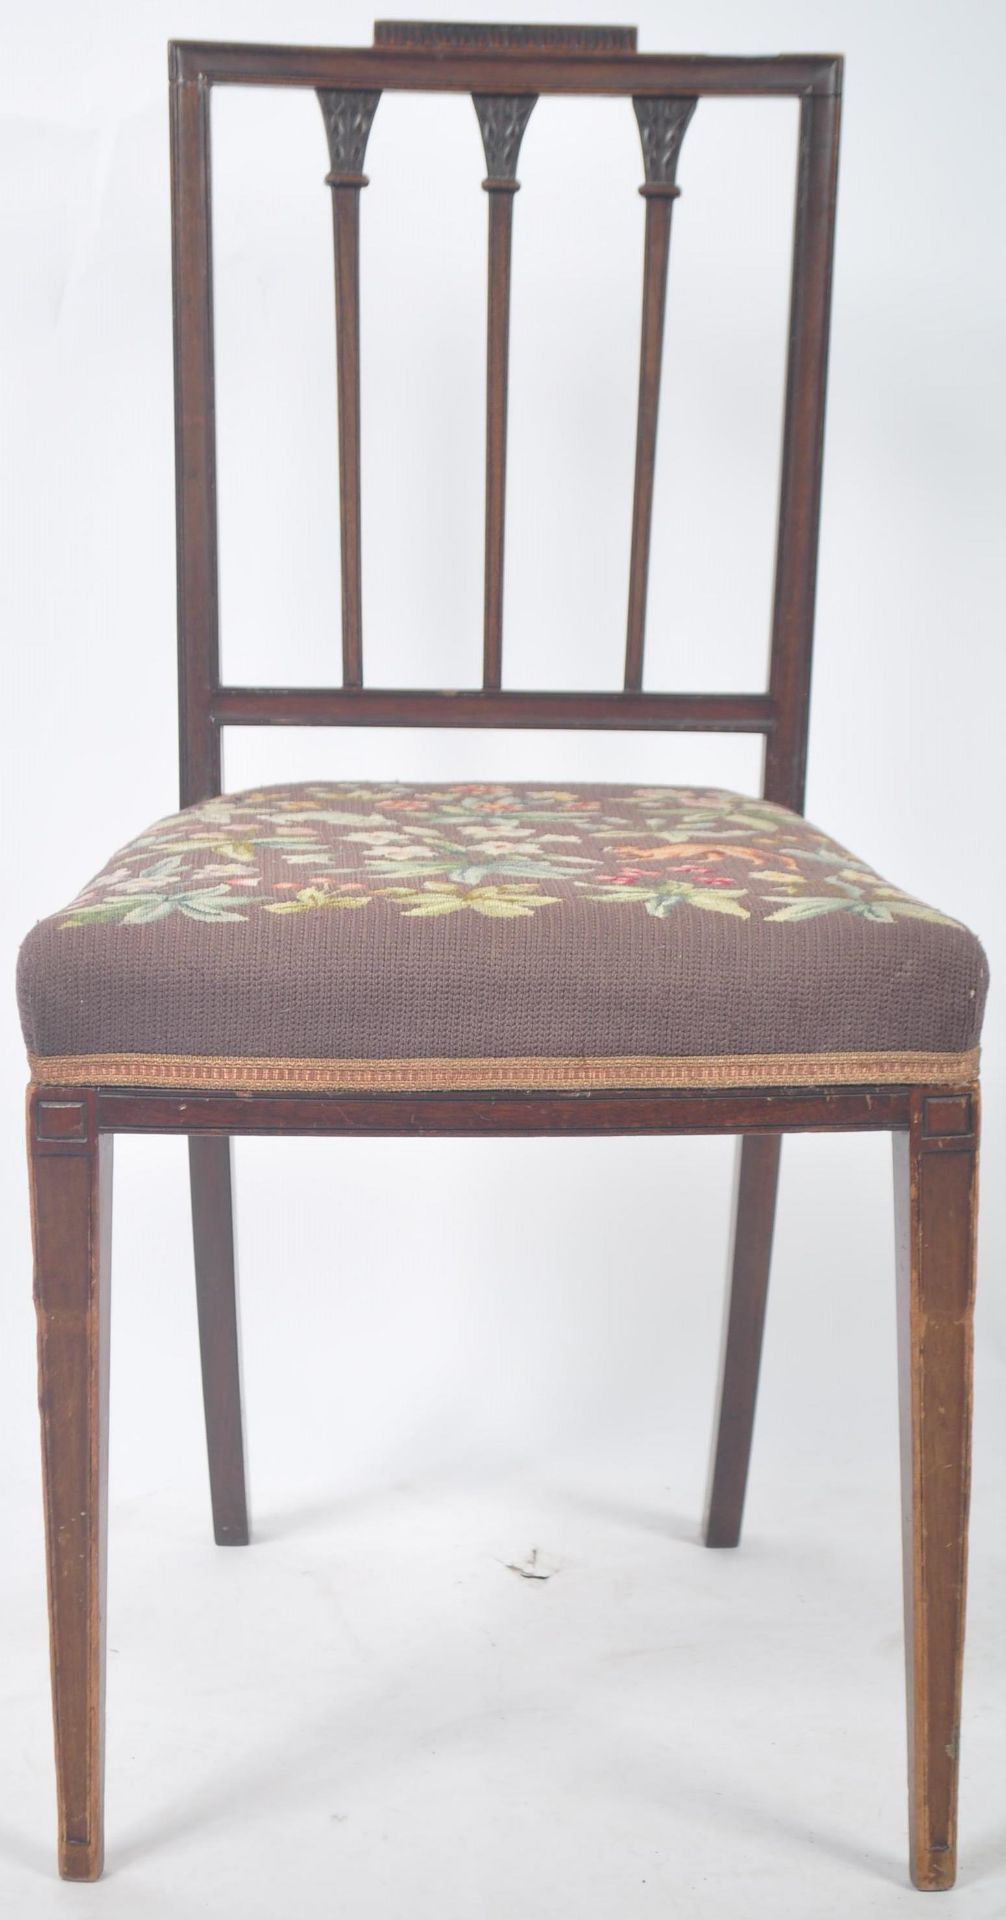 19TH CENTURY GEORGIAN MAHOGANY & TAPESTRY DINING CHAIR - Image 8 of 8